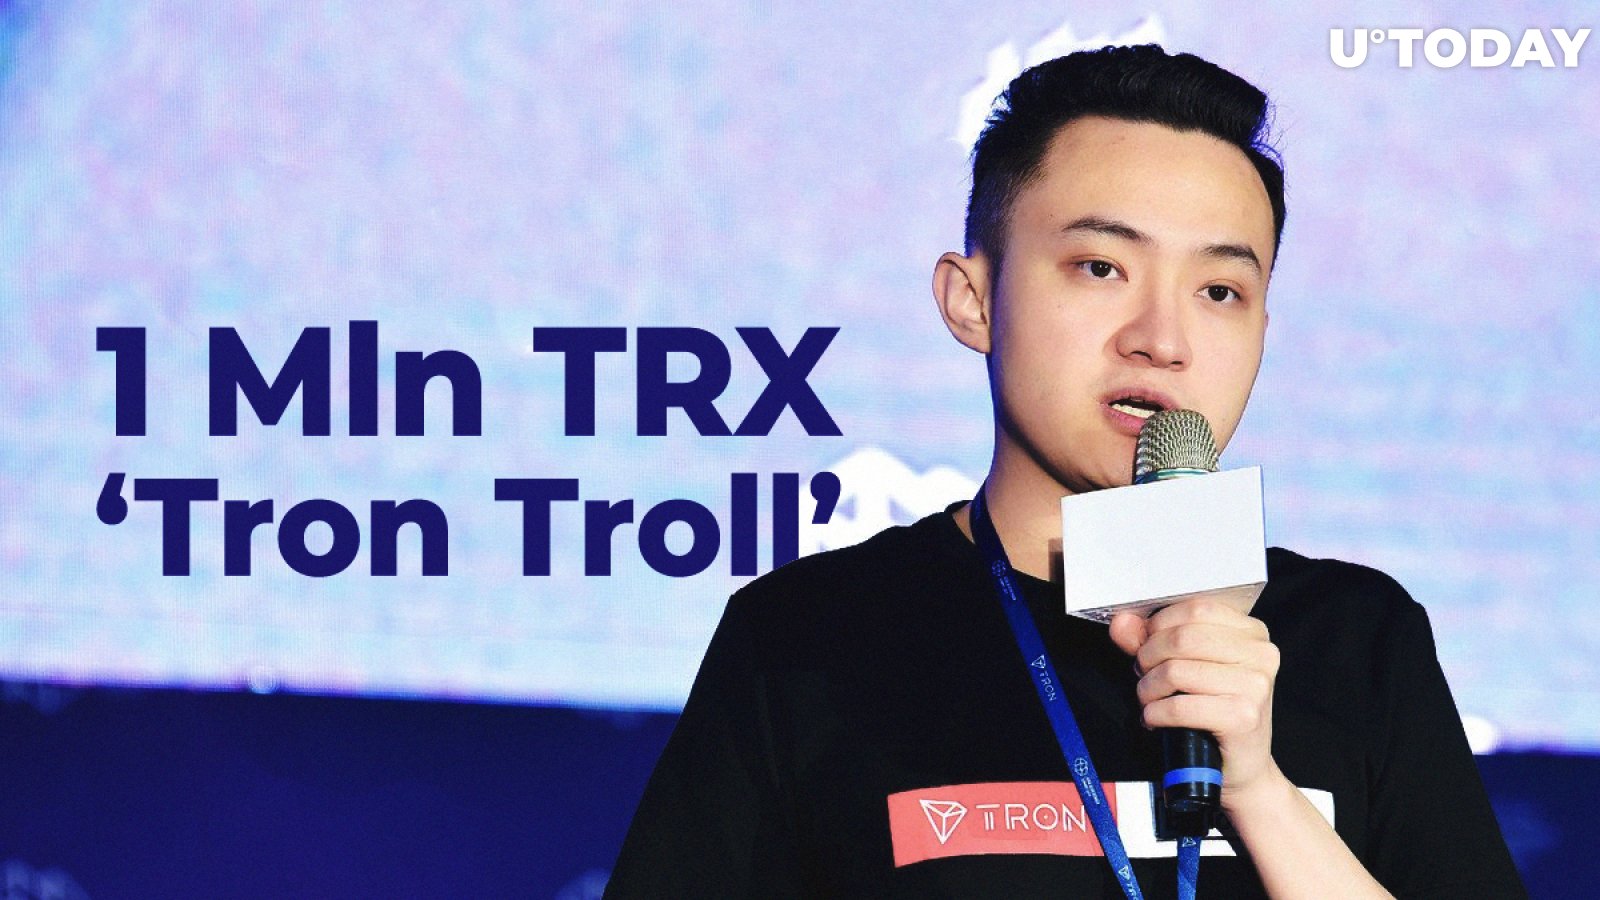 Justin Sun to Pay 1 Mln TRX to Major Bitcoiner ‘Tron Troll’, Ethereum Allegedly Does the Same